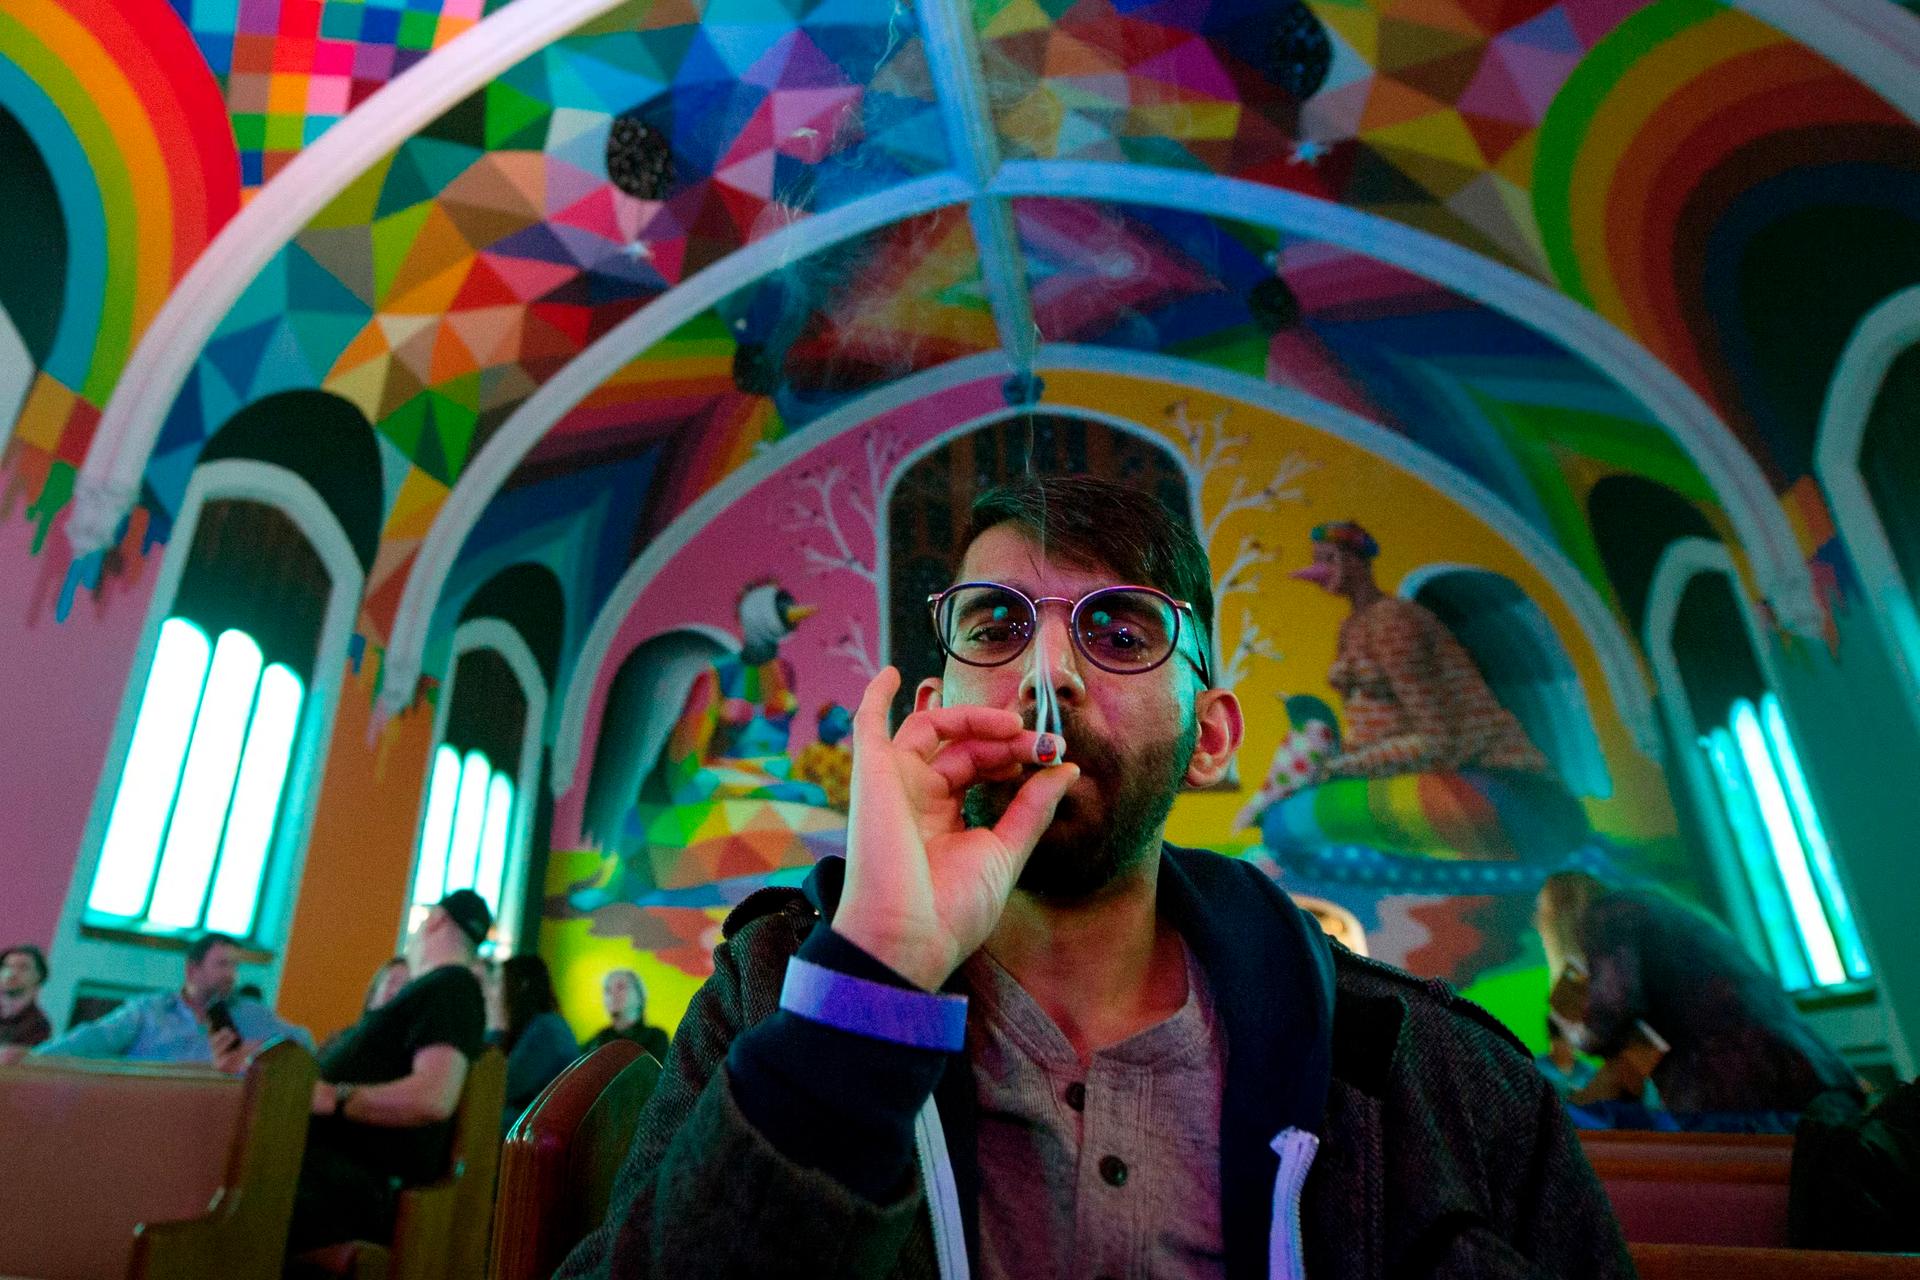 A man with glasses smokes a joint while gazing slightly down at the viewer. He is framed by the rainbow arched ceiling of the International Churhc of Cannabis. Behind him are other people sitting in pews for an Elevationist non denominational service